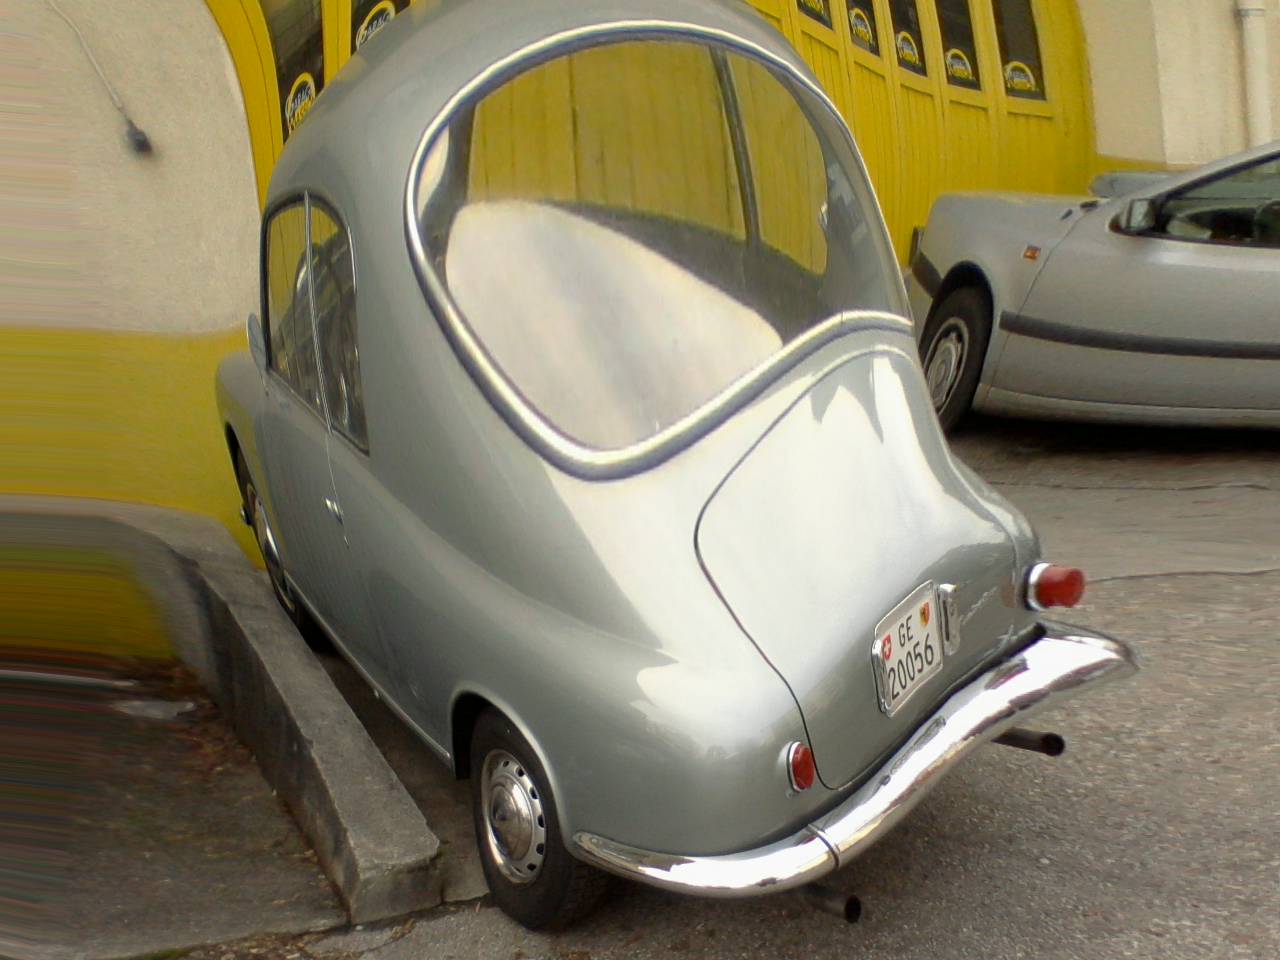 an old style silver car is parked in the street